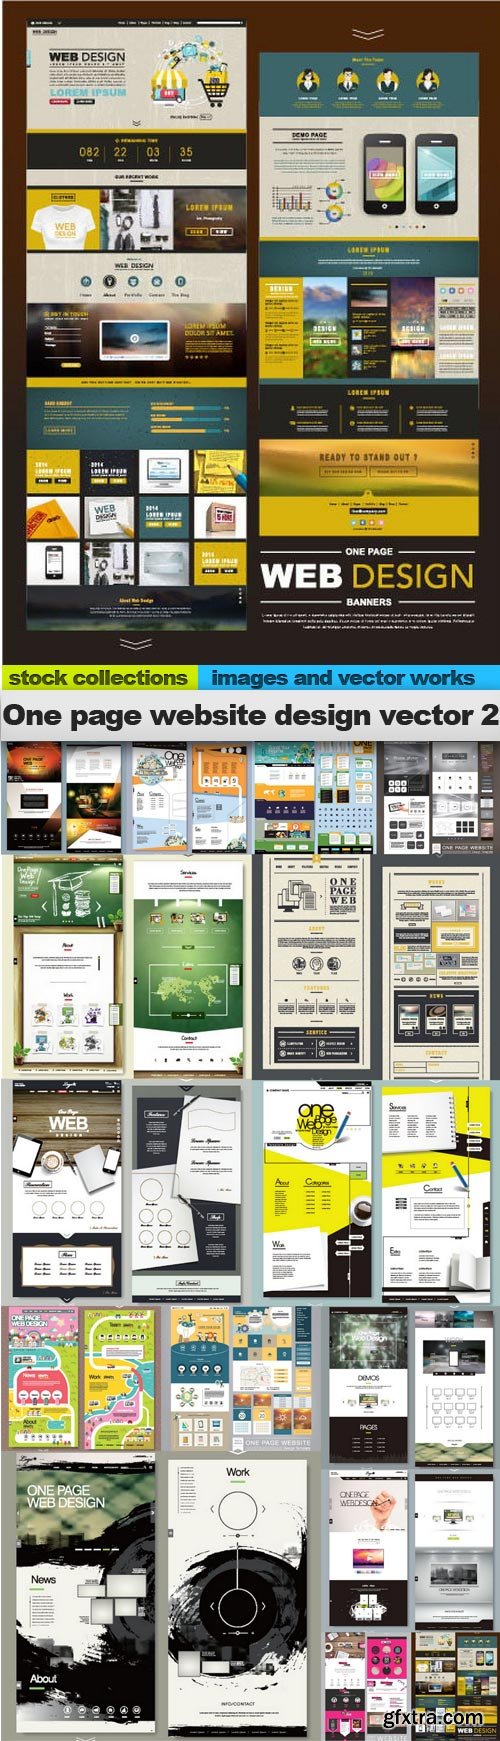 One page website design vector 2, 15 x EPS